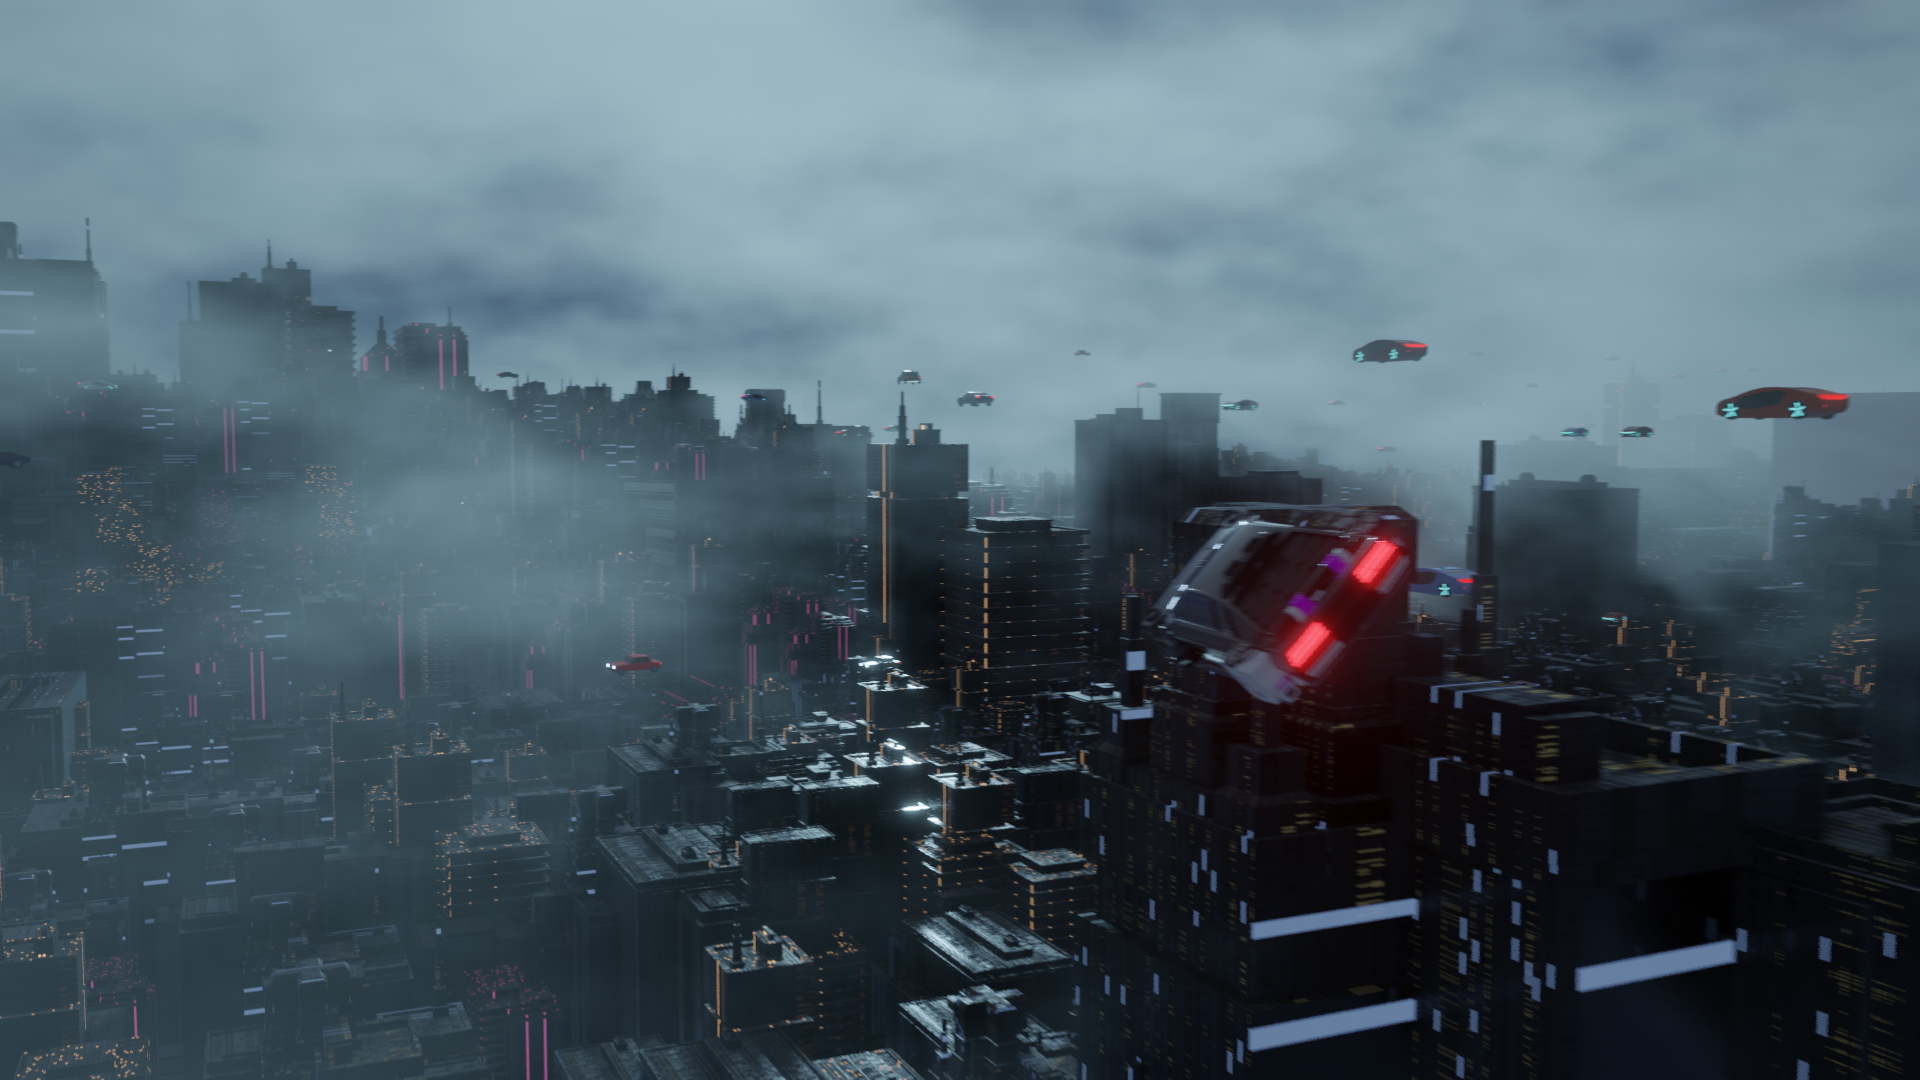 Blade runner style Cityscapes preview image 1